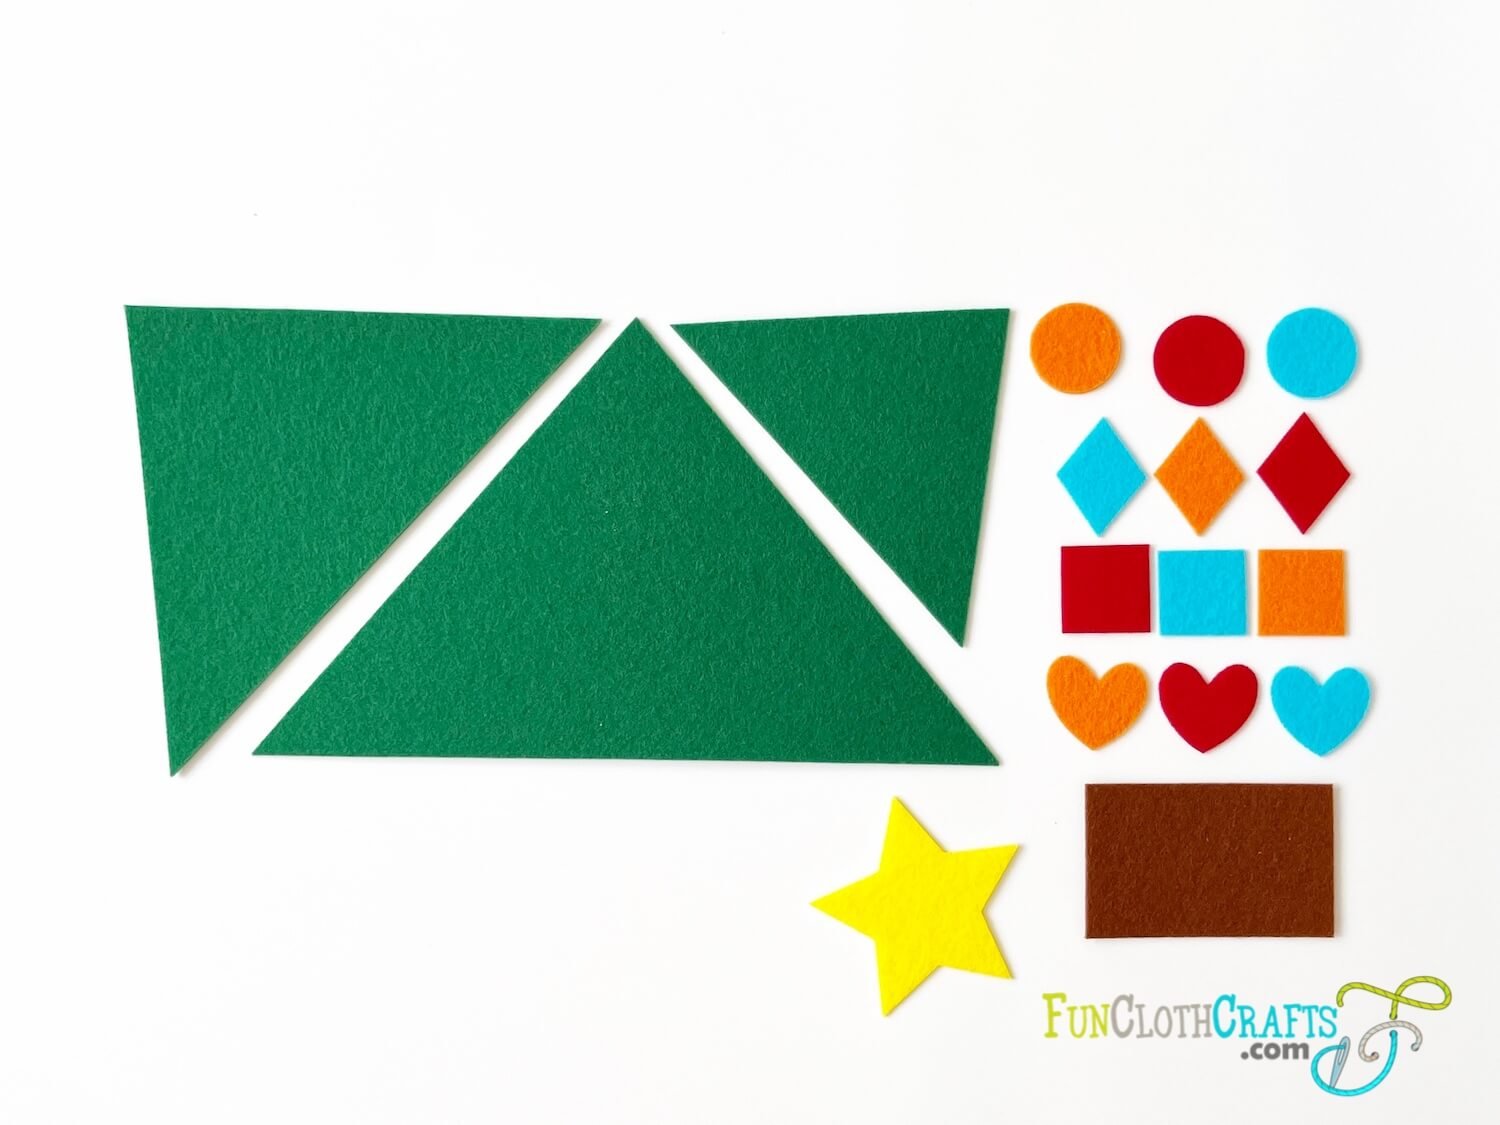 DIY Felt Shape Activity for Toddlers [Free Pattern]